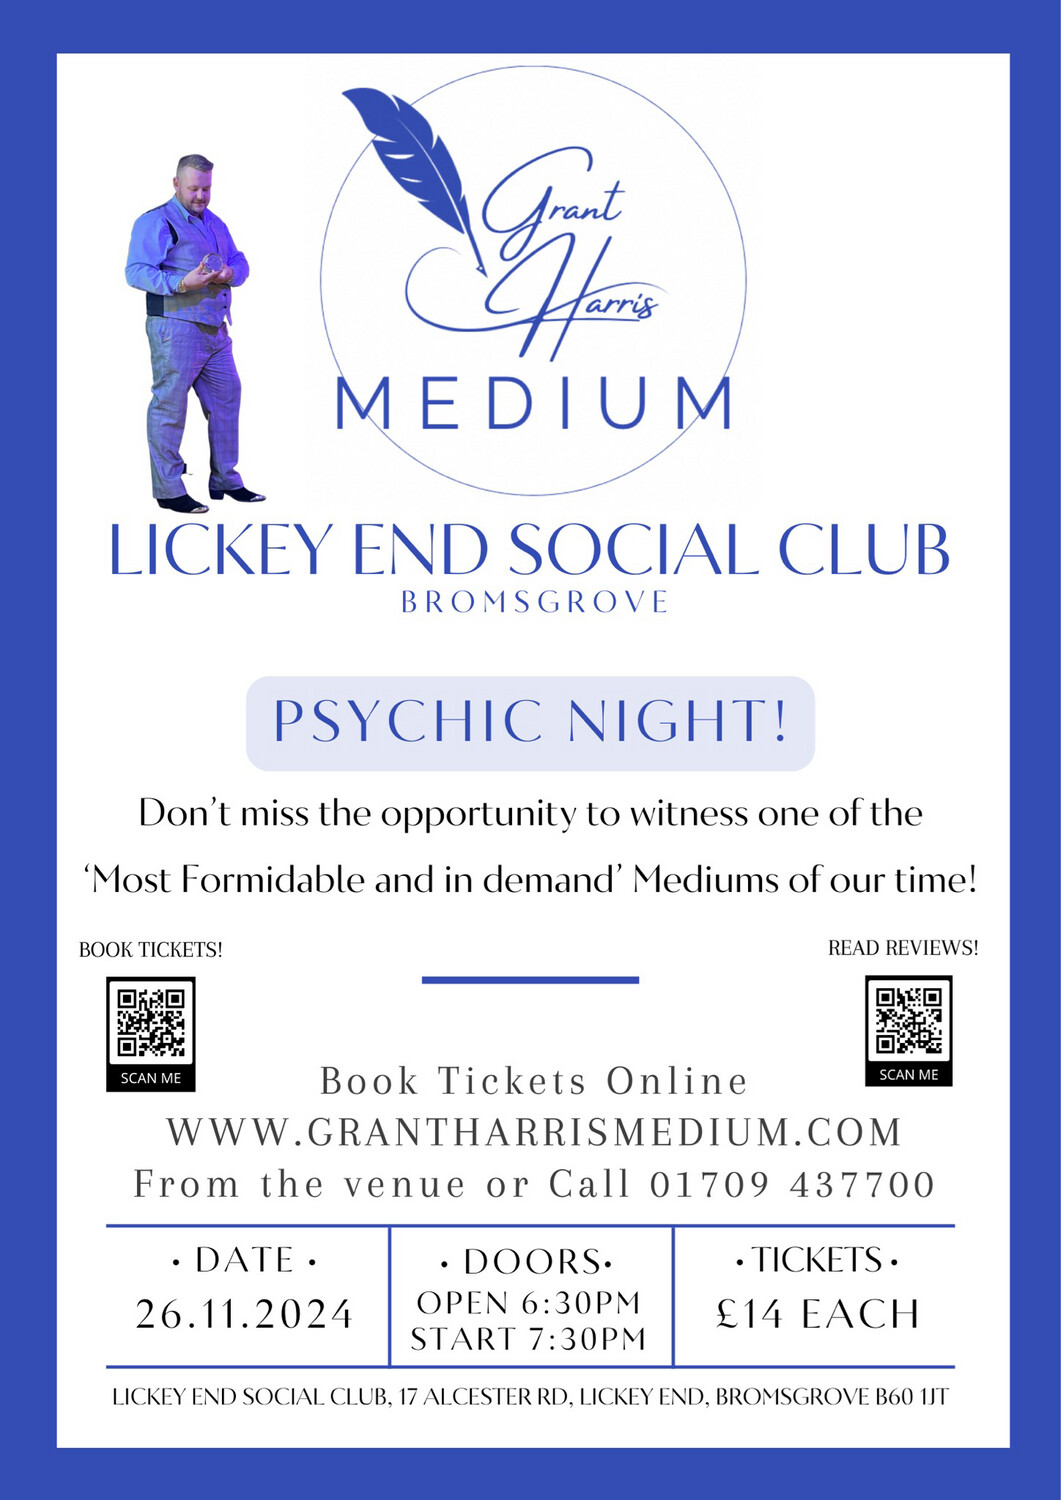 Psychic Night | Lickey End Social Club, Bromsgrove, Worcestershire, Tue 26th November 2024